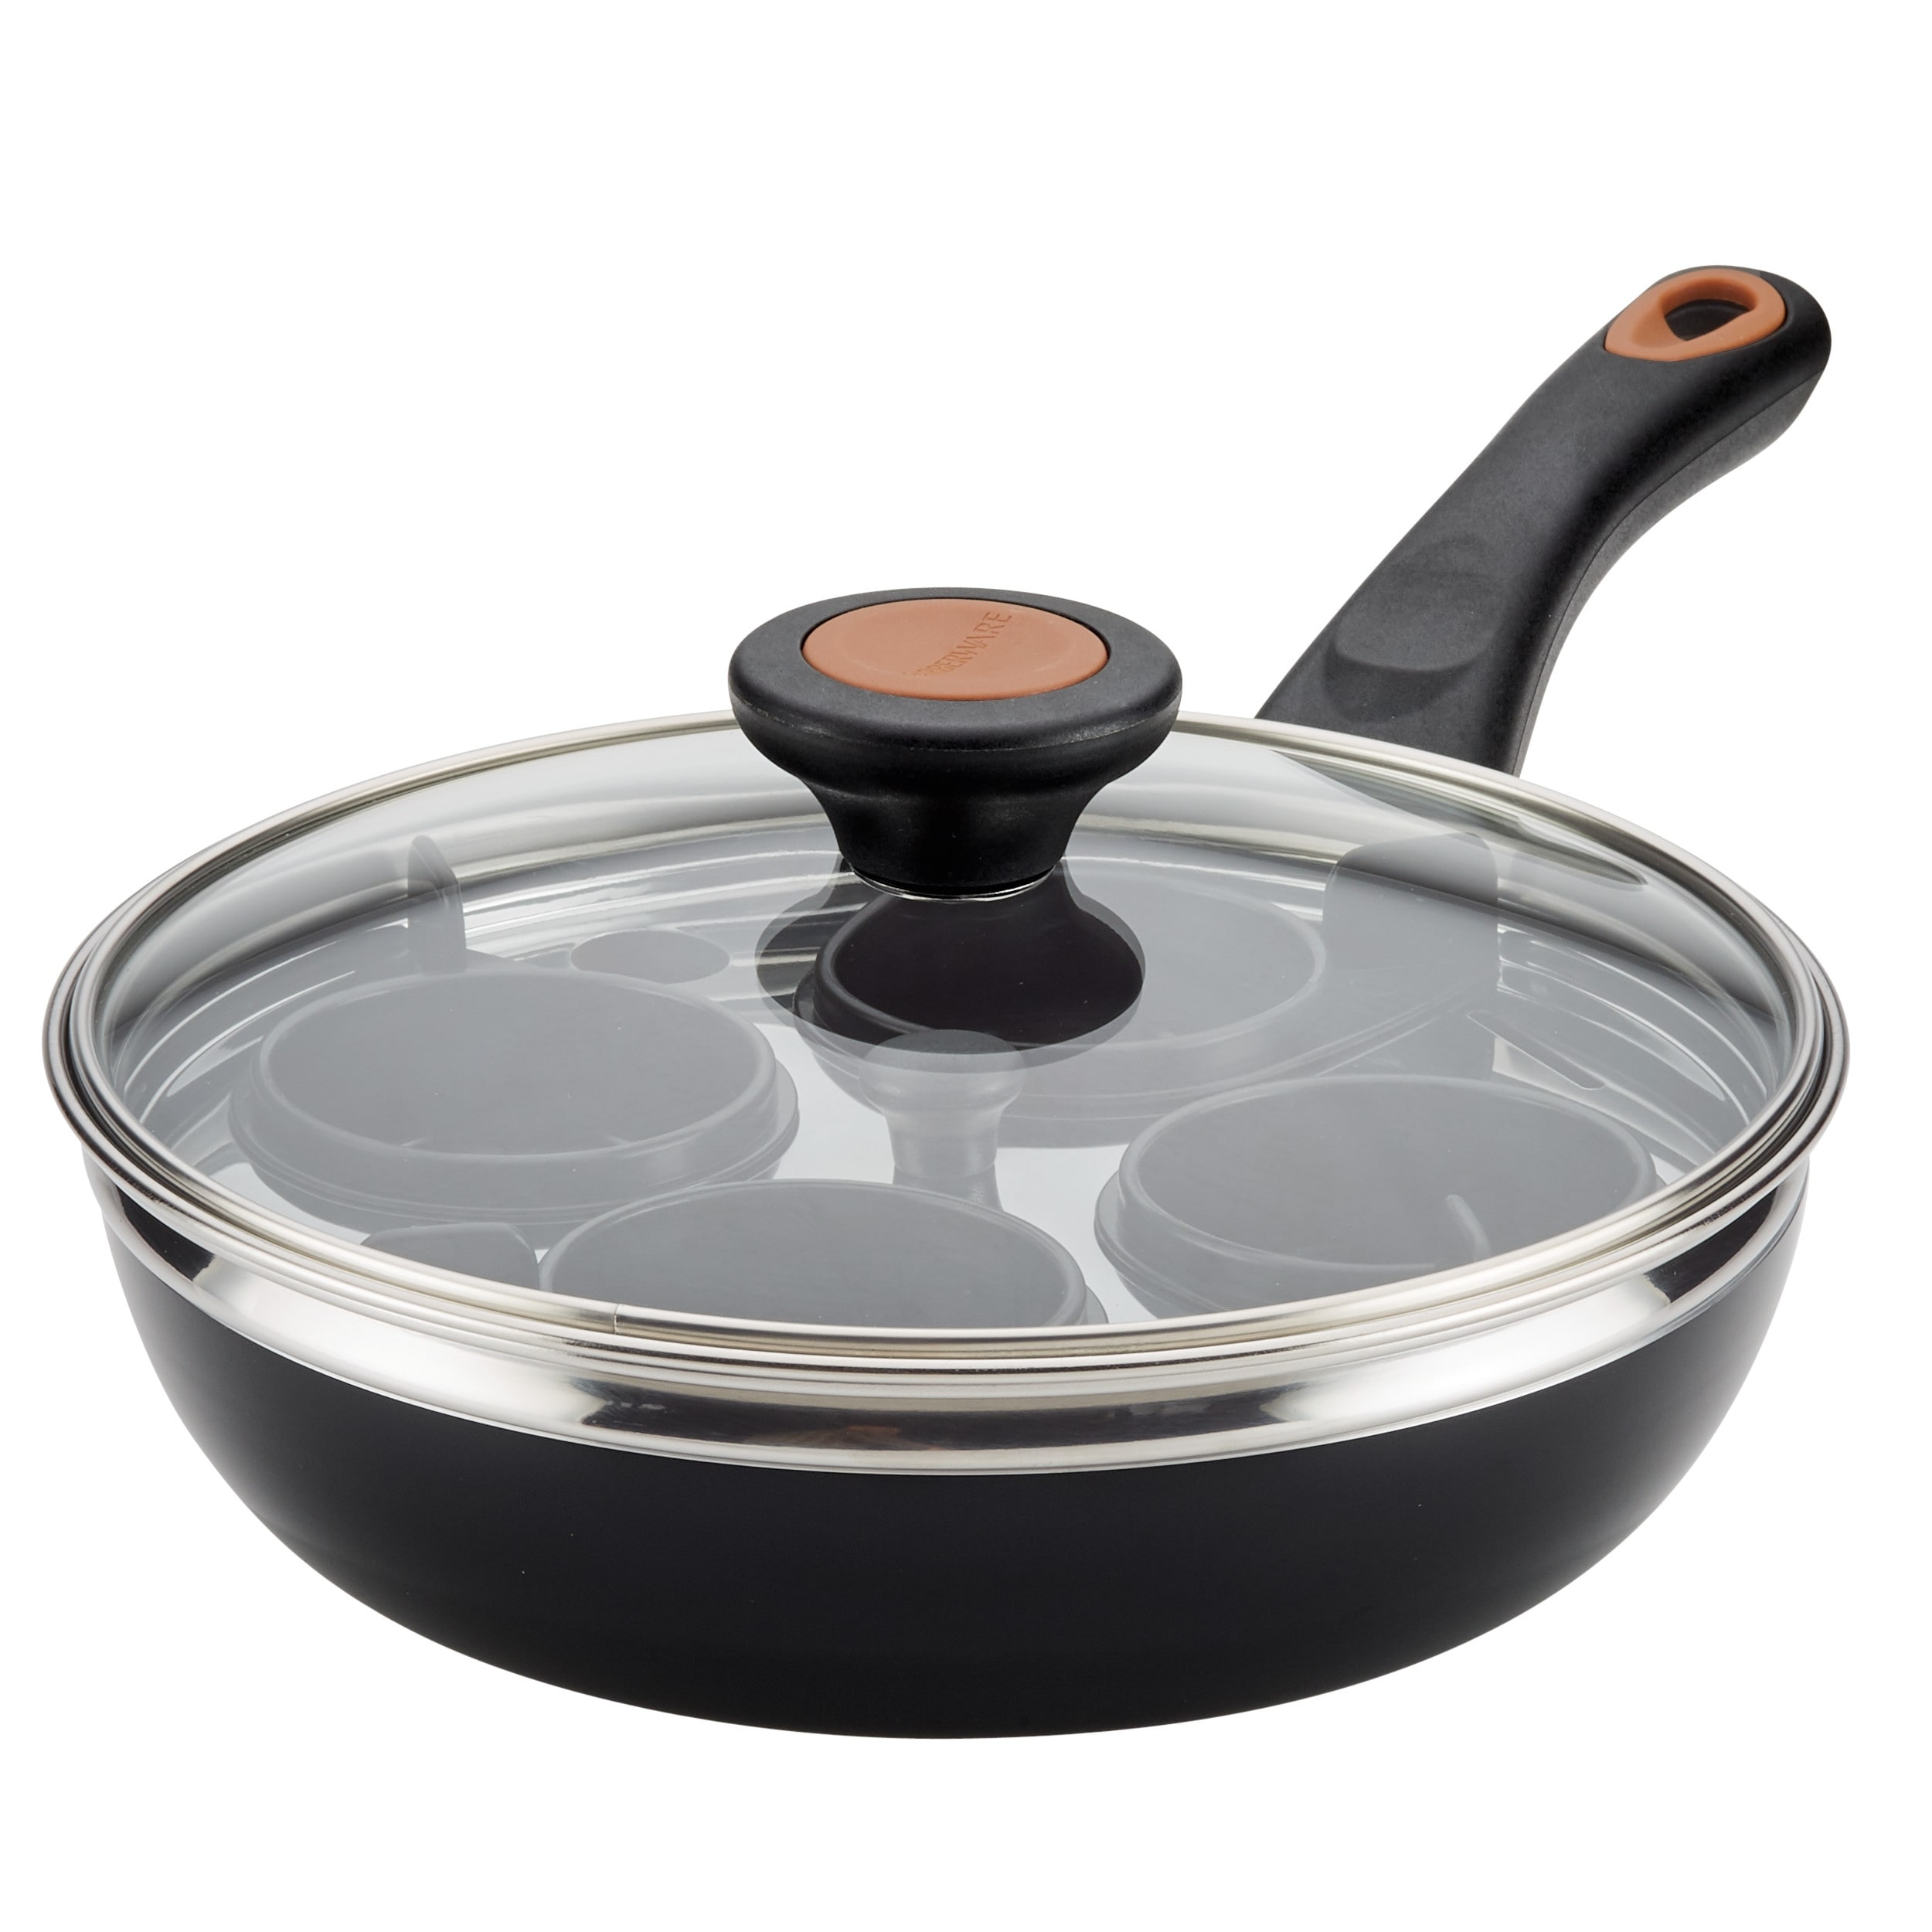 https://ak1.ostkcdn.com/images/products/is/images/direct/ac3ecf94f871b64ca2a85d59f075f24d5fd343a1/Farberware-Glide-Copper-Ceramic-Nonstick-Egg-Poacher-with-Lid%2C-8-Inch%2C-Black.jpg